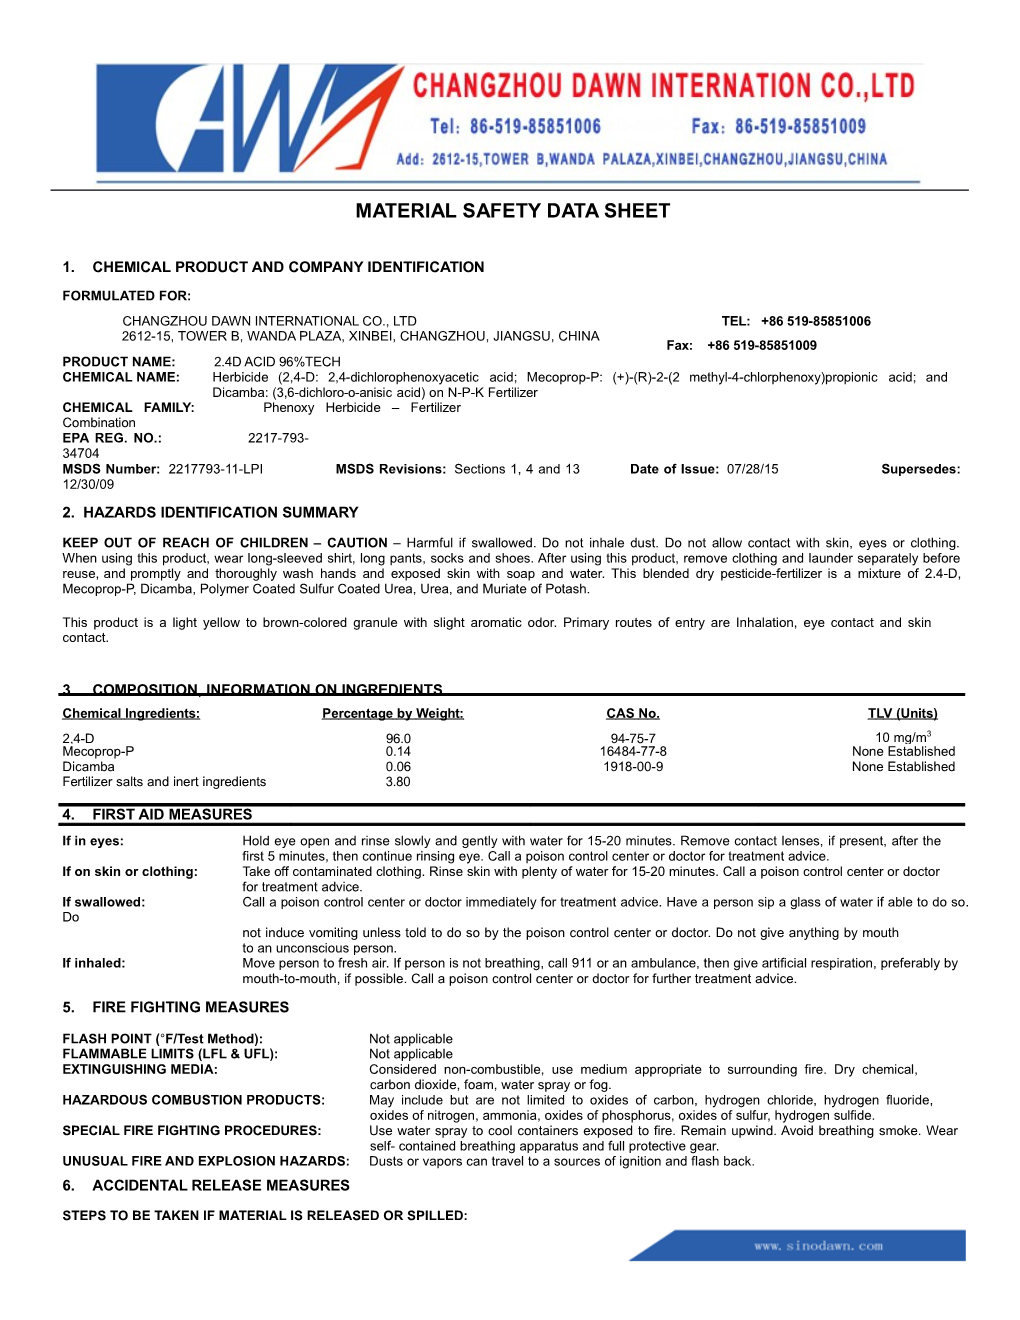 Material Safety Data Sheet s77